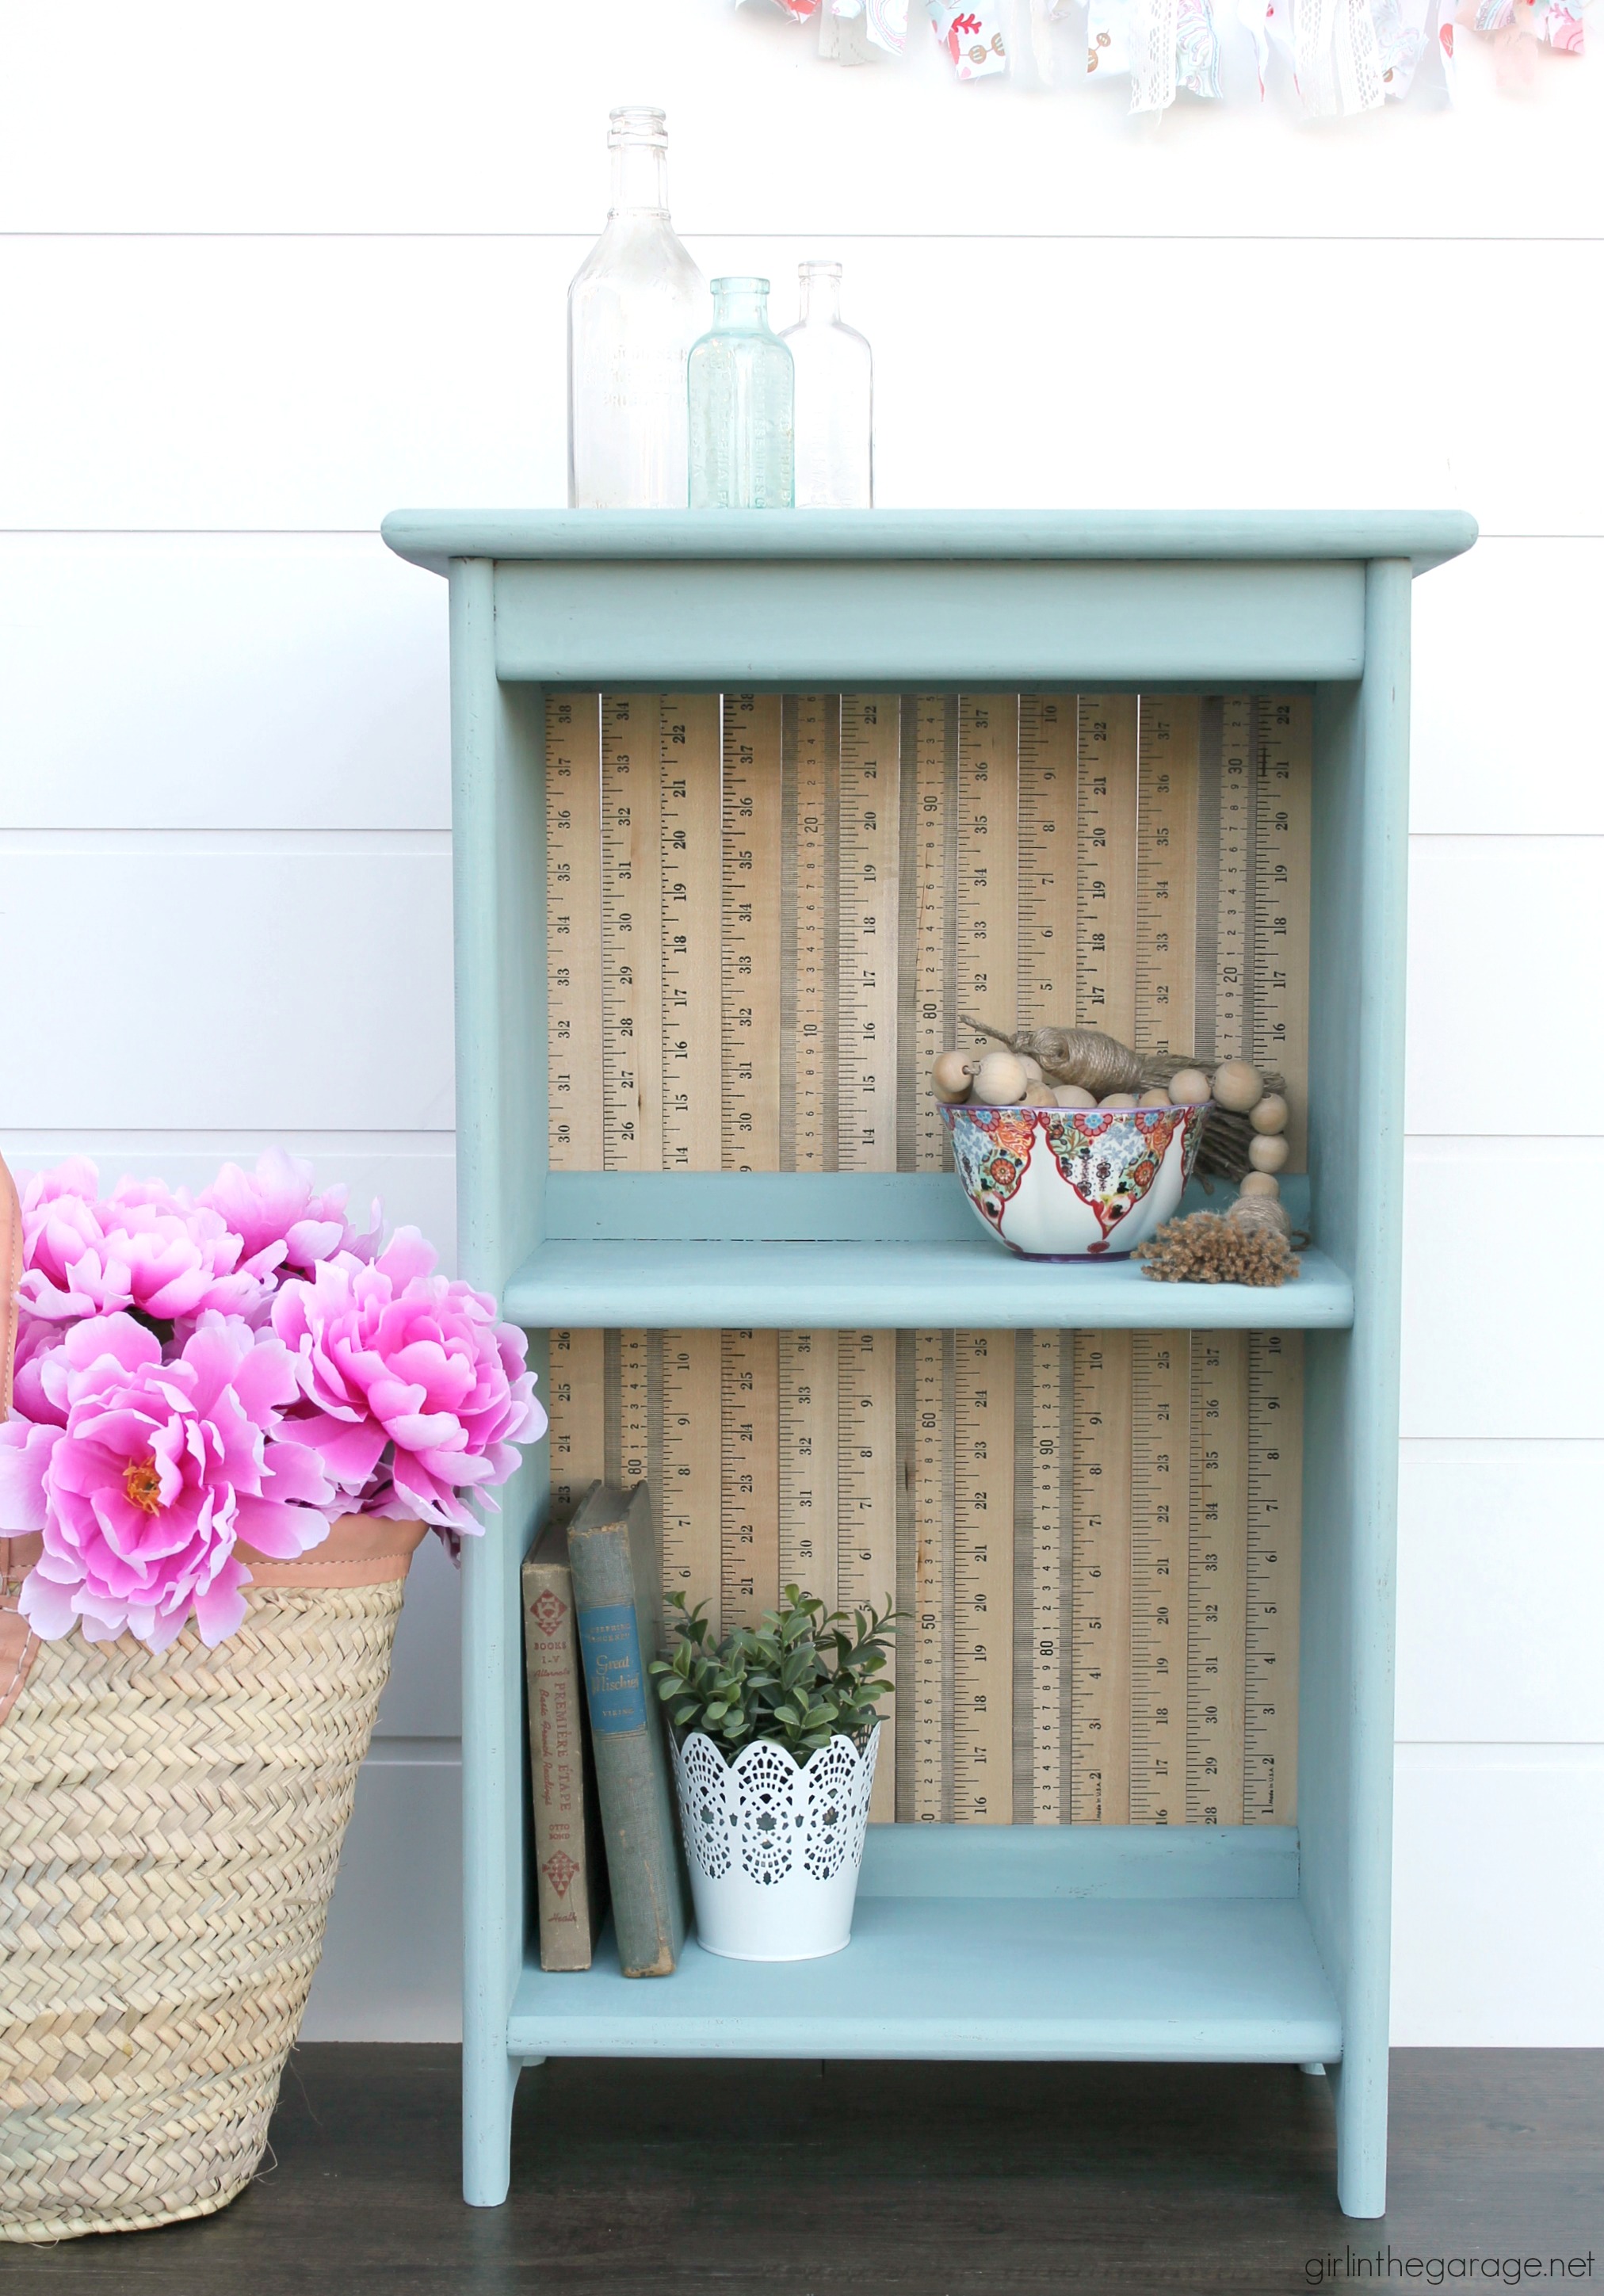 Give an old bookcase pizzazz with Chalk Paint and repurposed yardsticks. This easy painted furniture makeover idea oozes vintage charm. By Girl in the Garage